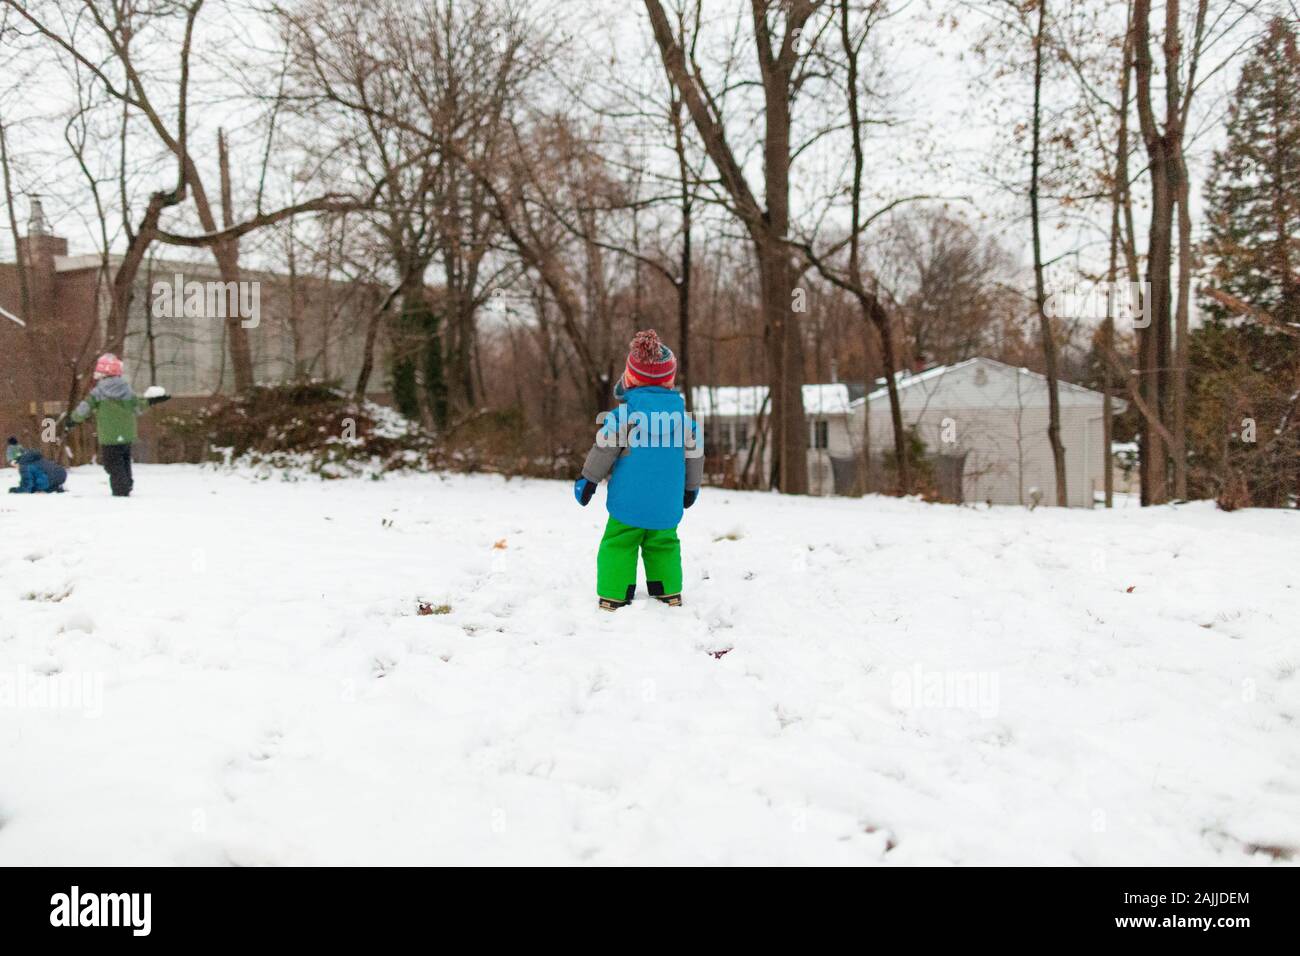 Three children in cold weather gear play in backyard after a snowstorm Stock Photo